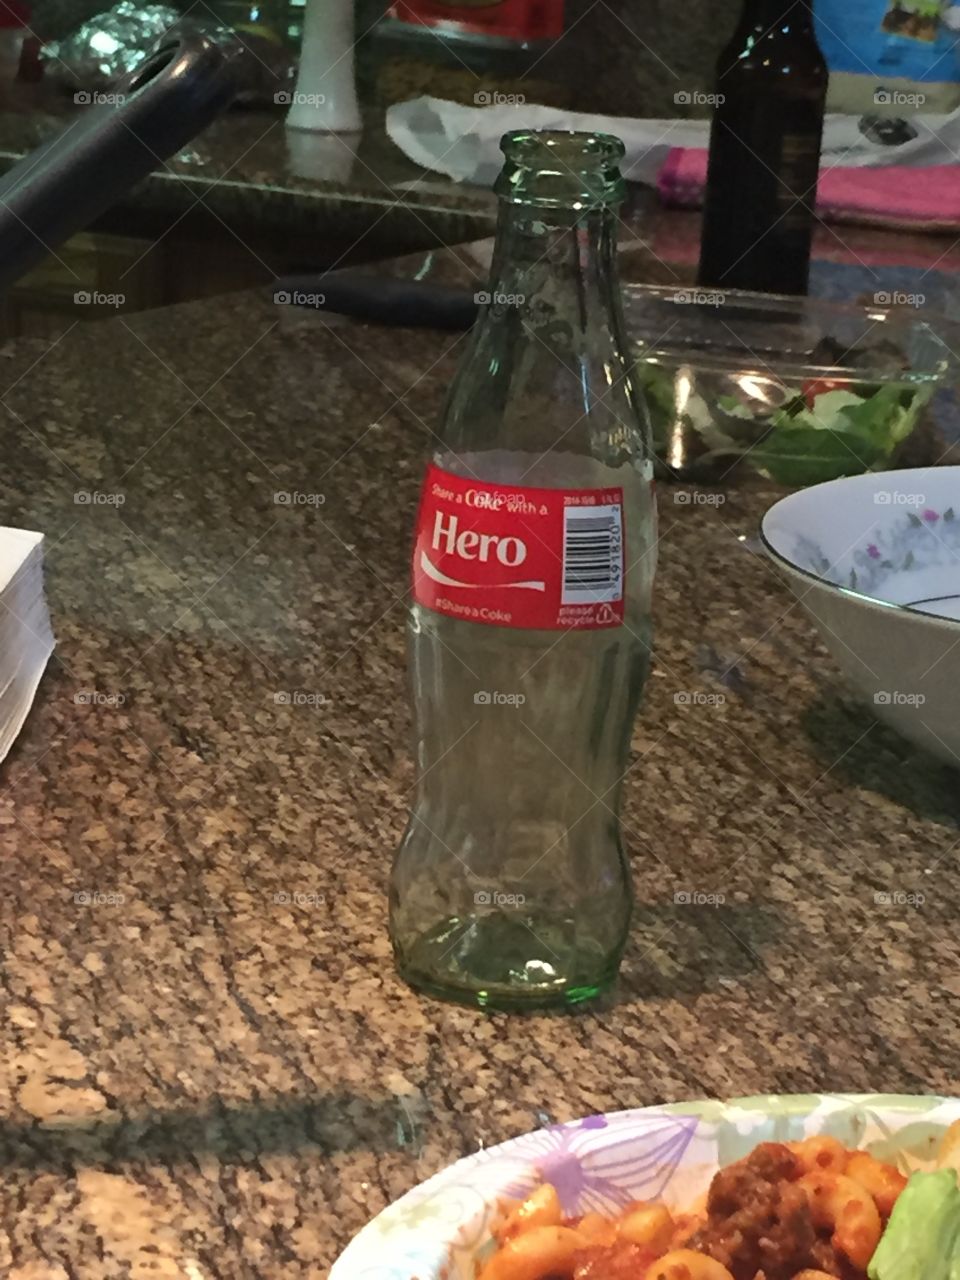 Share your Coke 